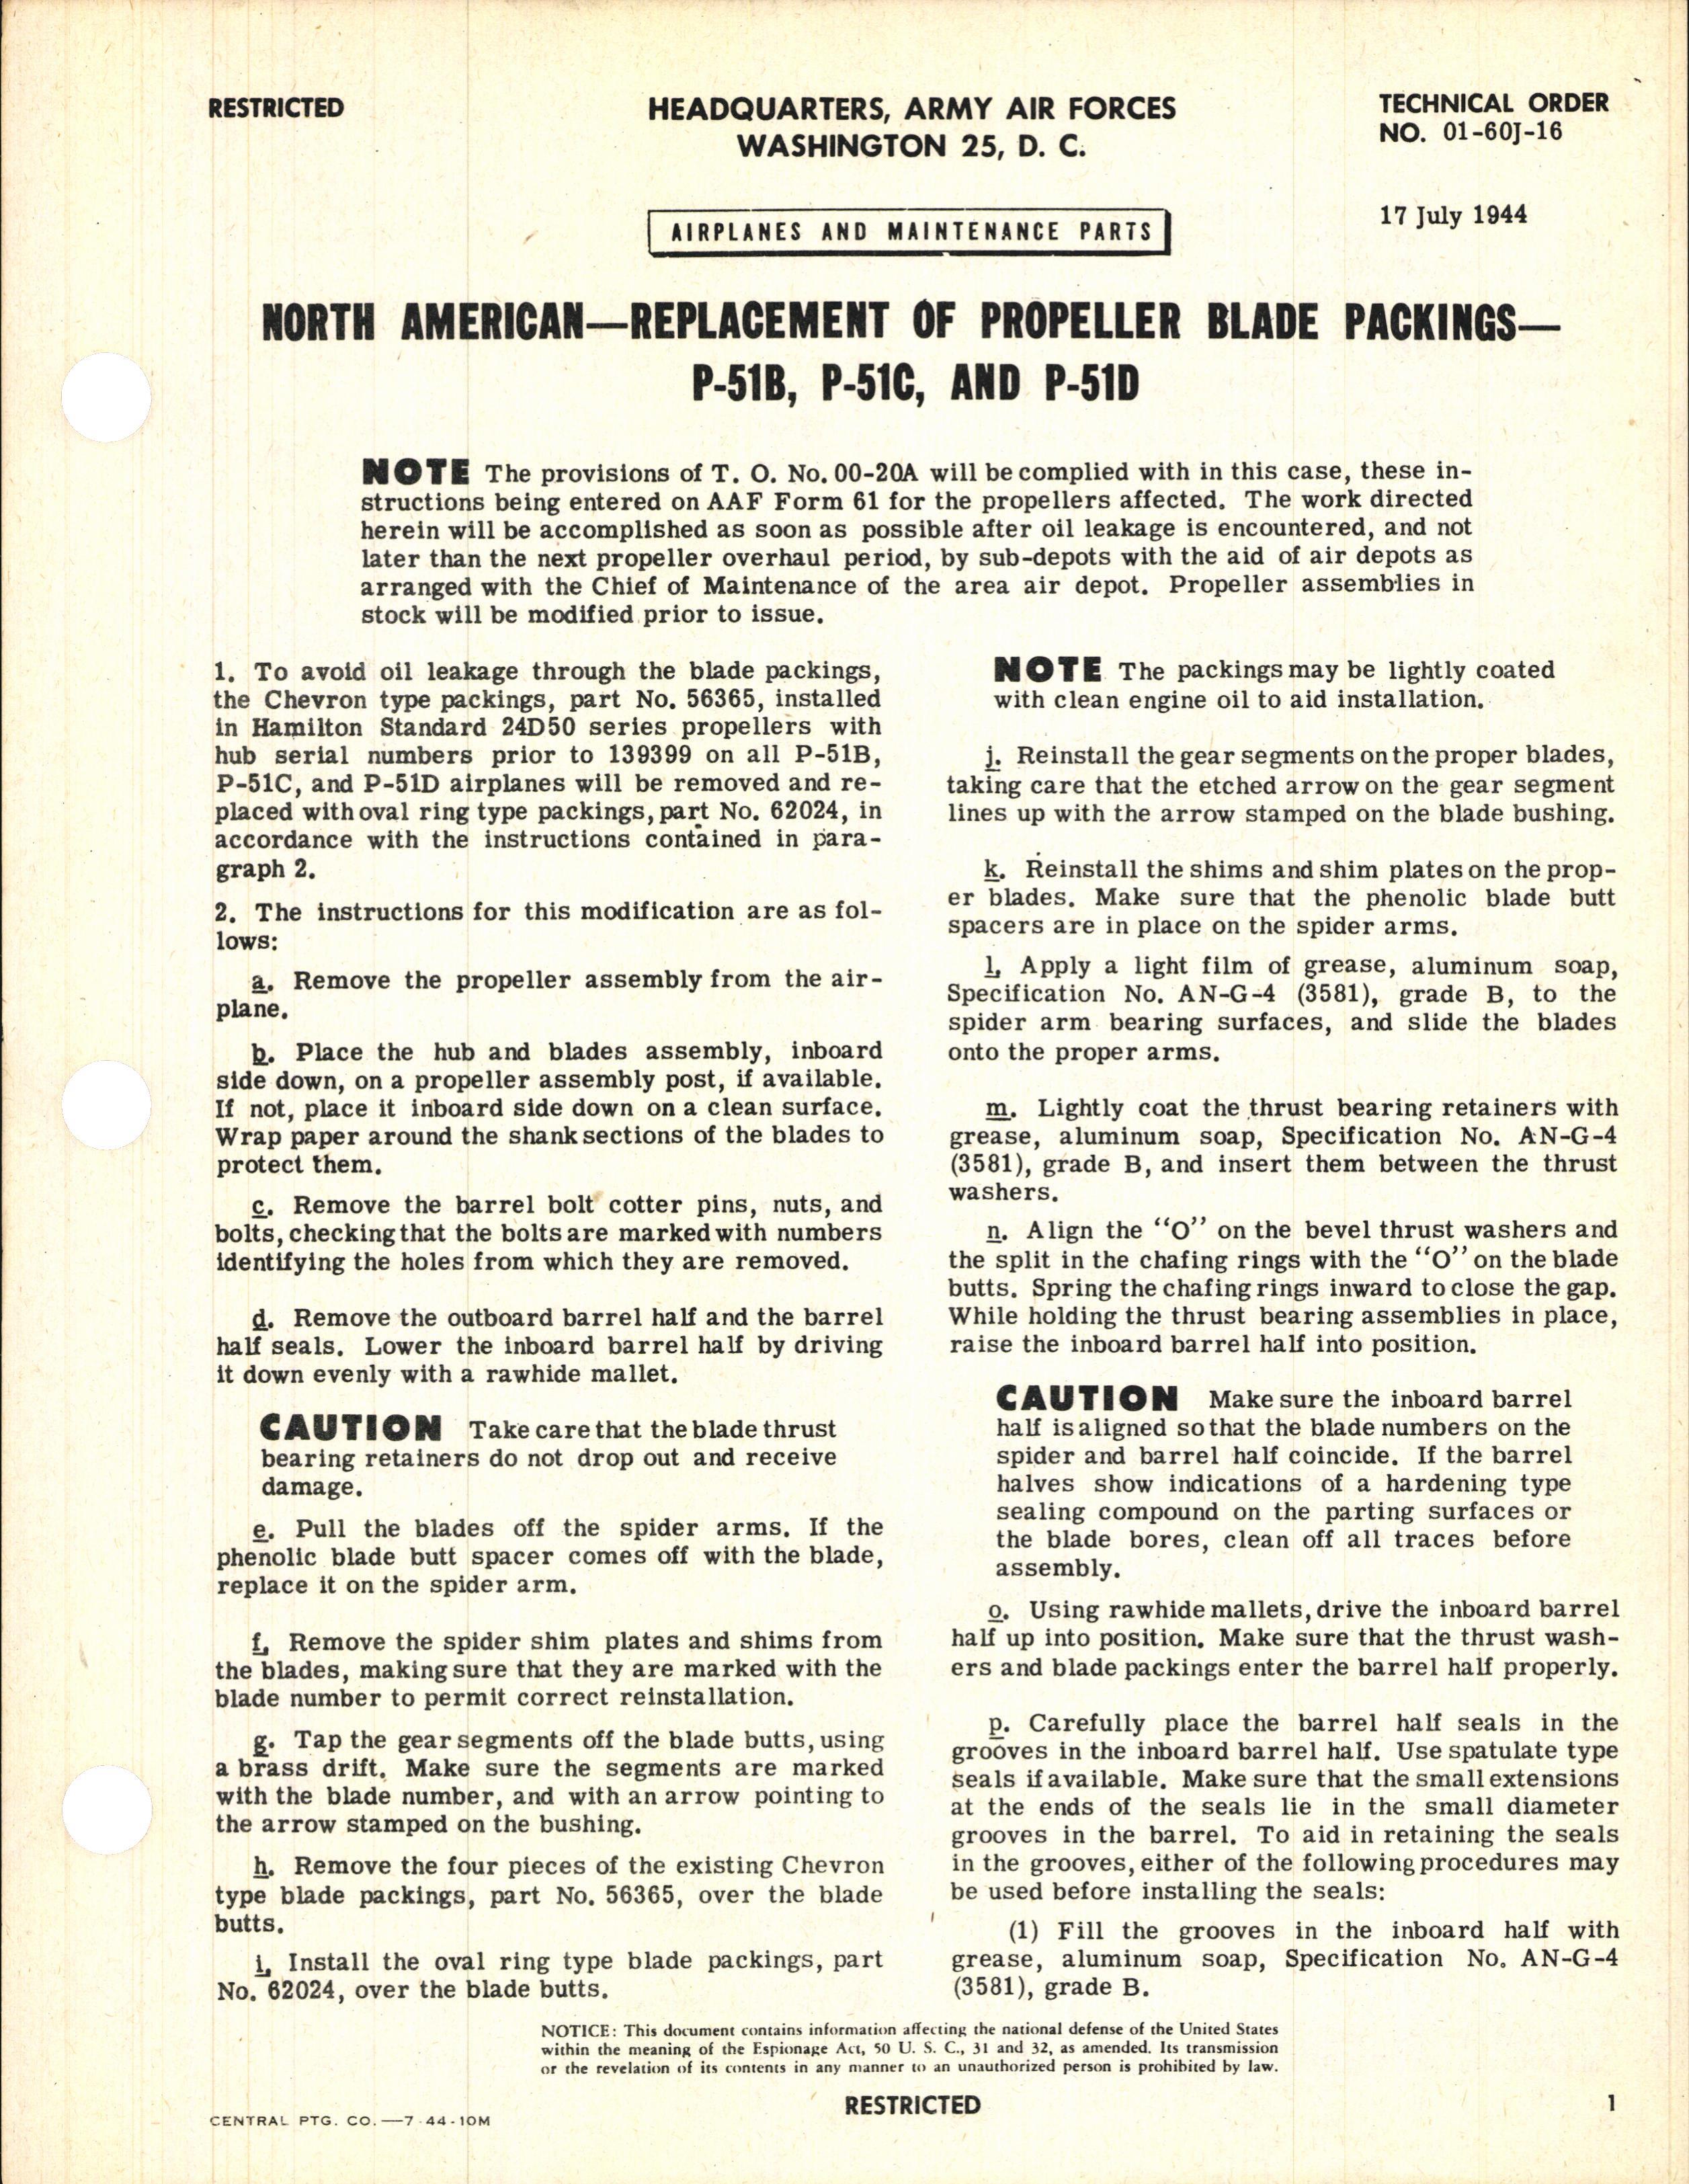 Sample page 1 from AirCorps Library document: Replacement of Propeller Blade Packings for P-51B, C, and D